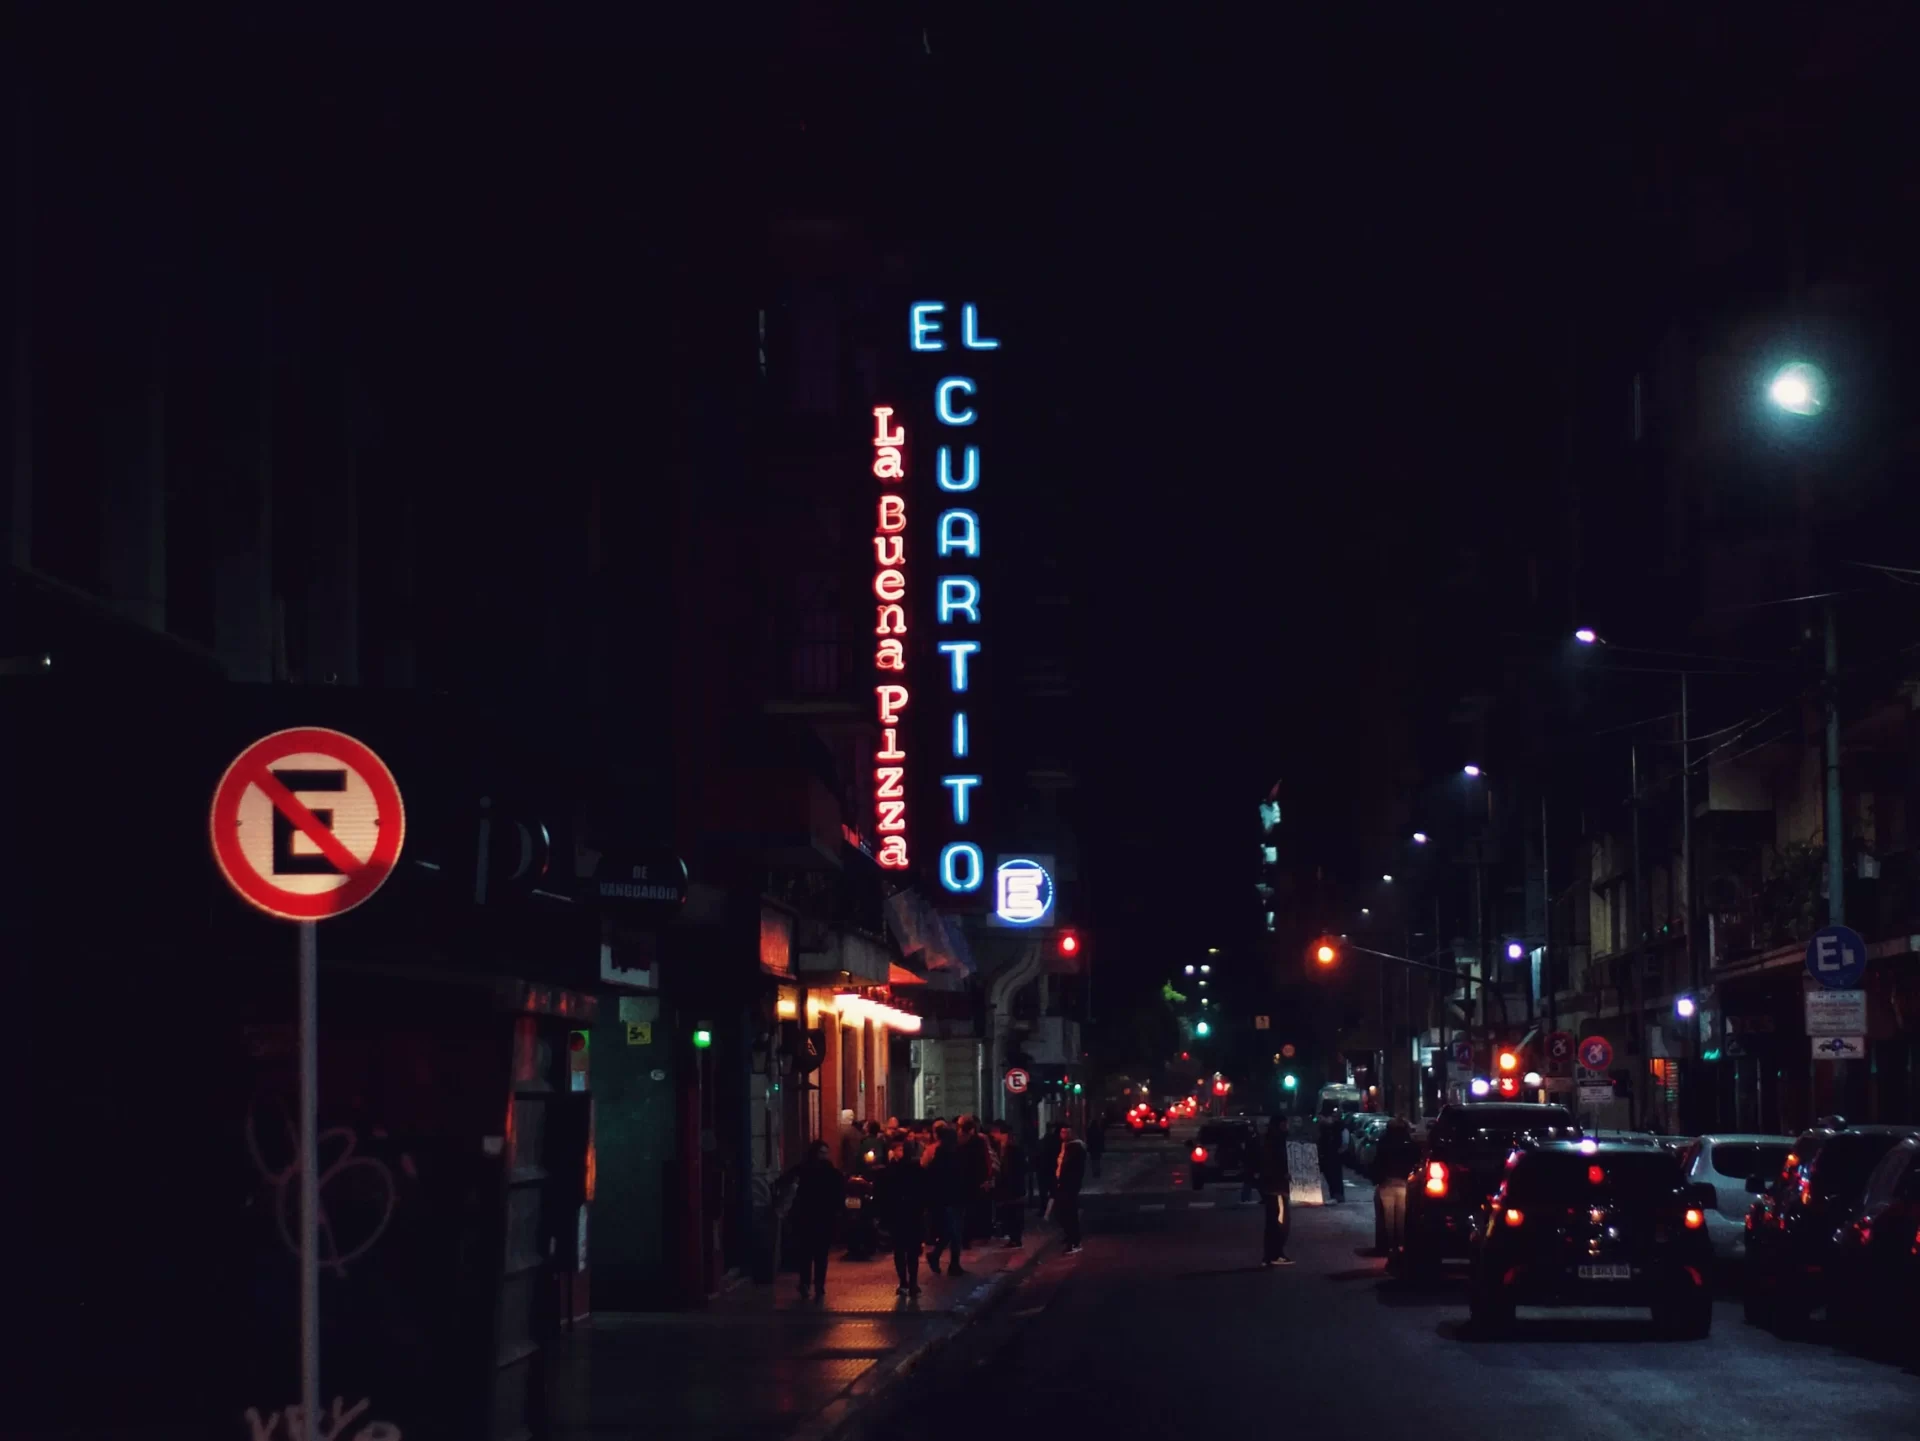 Neon sign with the words "El Cuartito, la buena pizza" featured to the side of a pizza store of the same name. The picture was taken during night time. El Cuartito's is for many the best pizza in Buenos Aires.